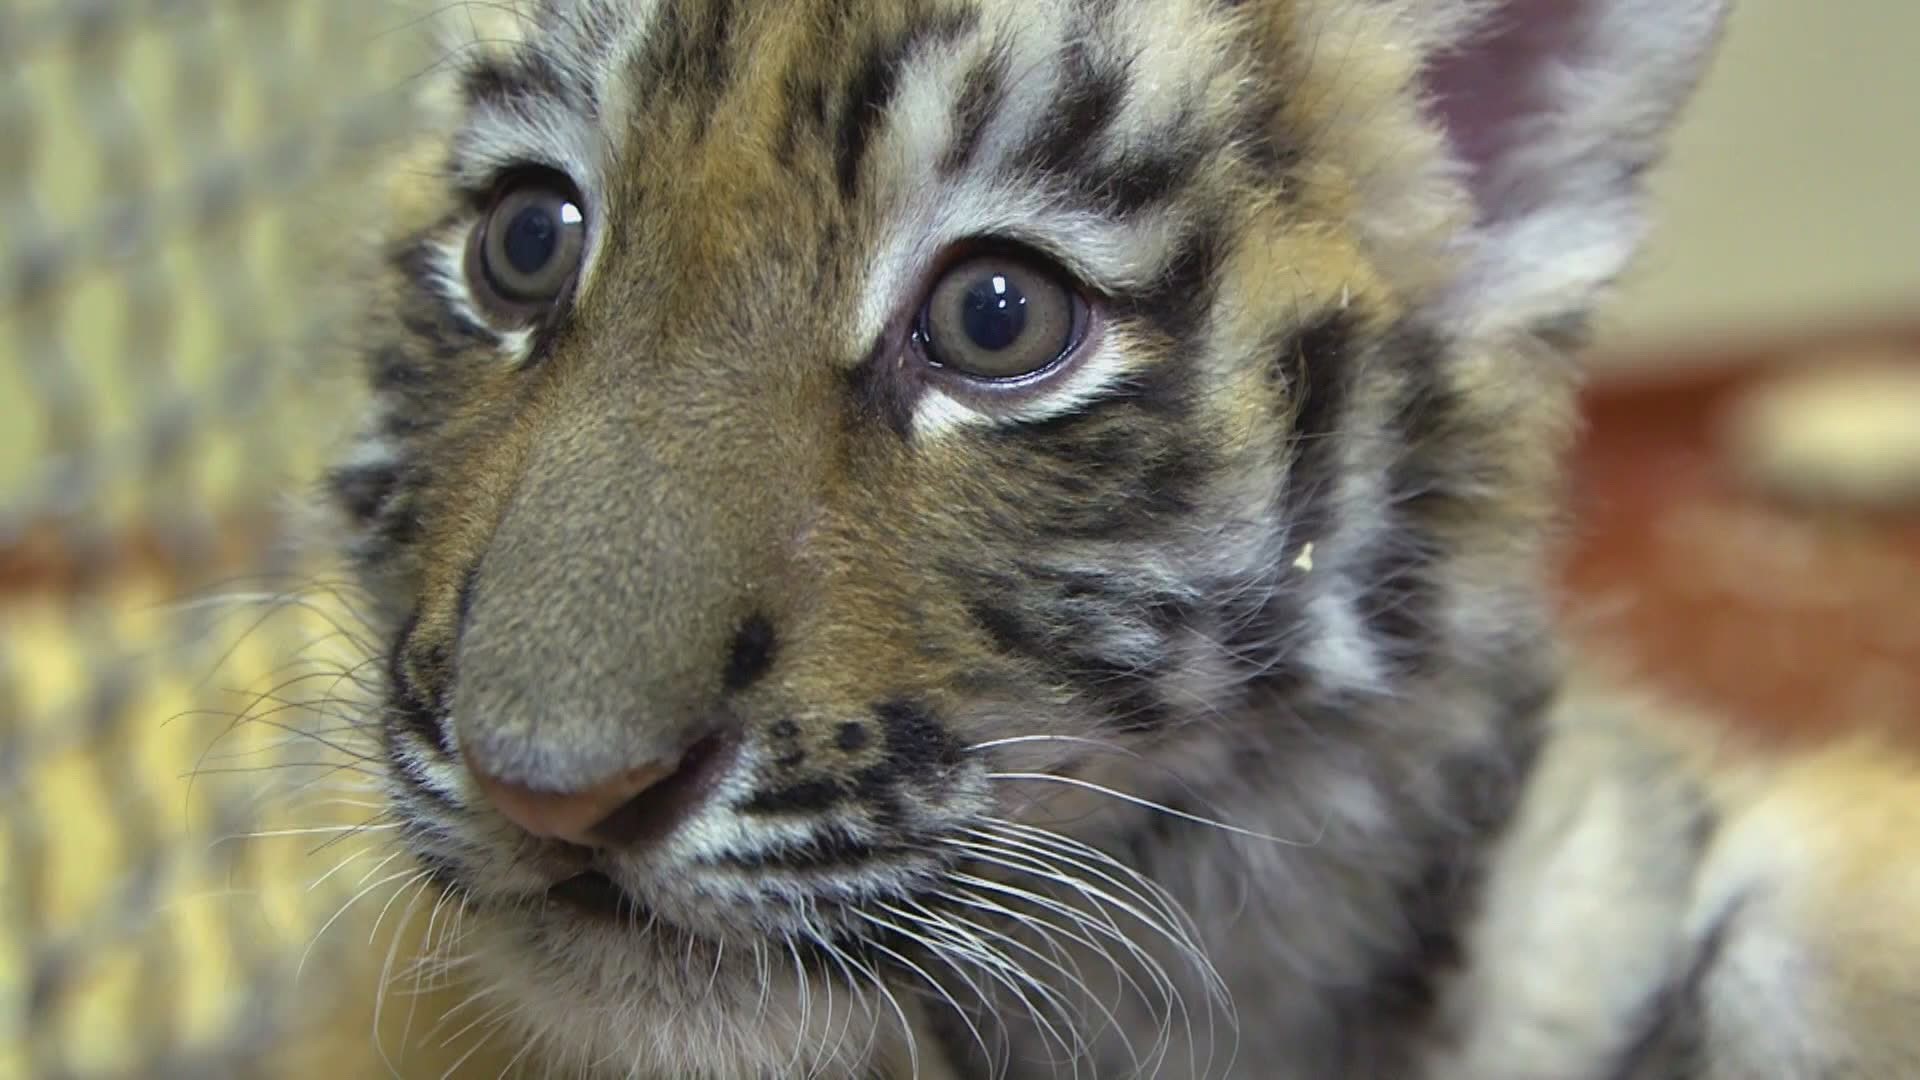 Feb. 18, 2021: Just weeks after announcing the birth of two endangered Amur tigers, the Cleveland Metroparks Zoo is now welcoming a 2-month-old Malayan tiger cub.